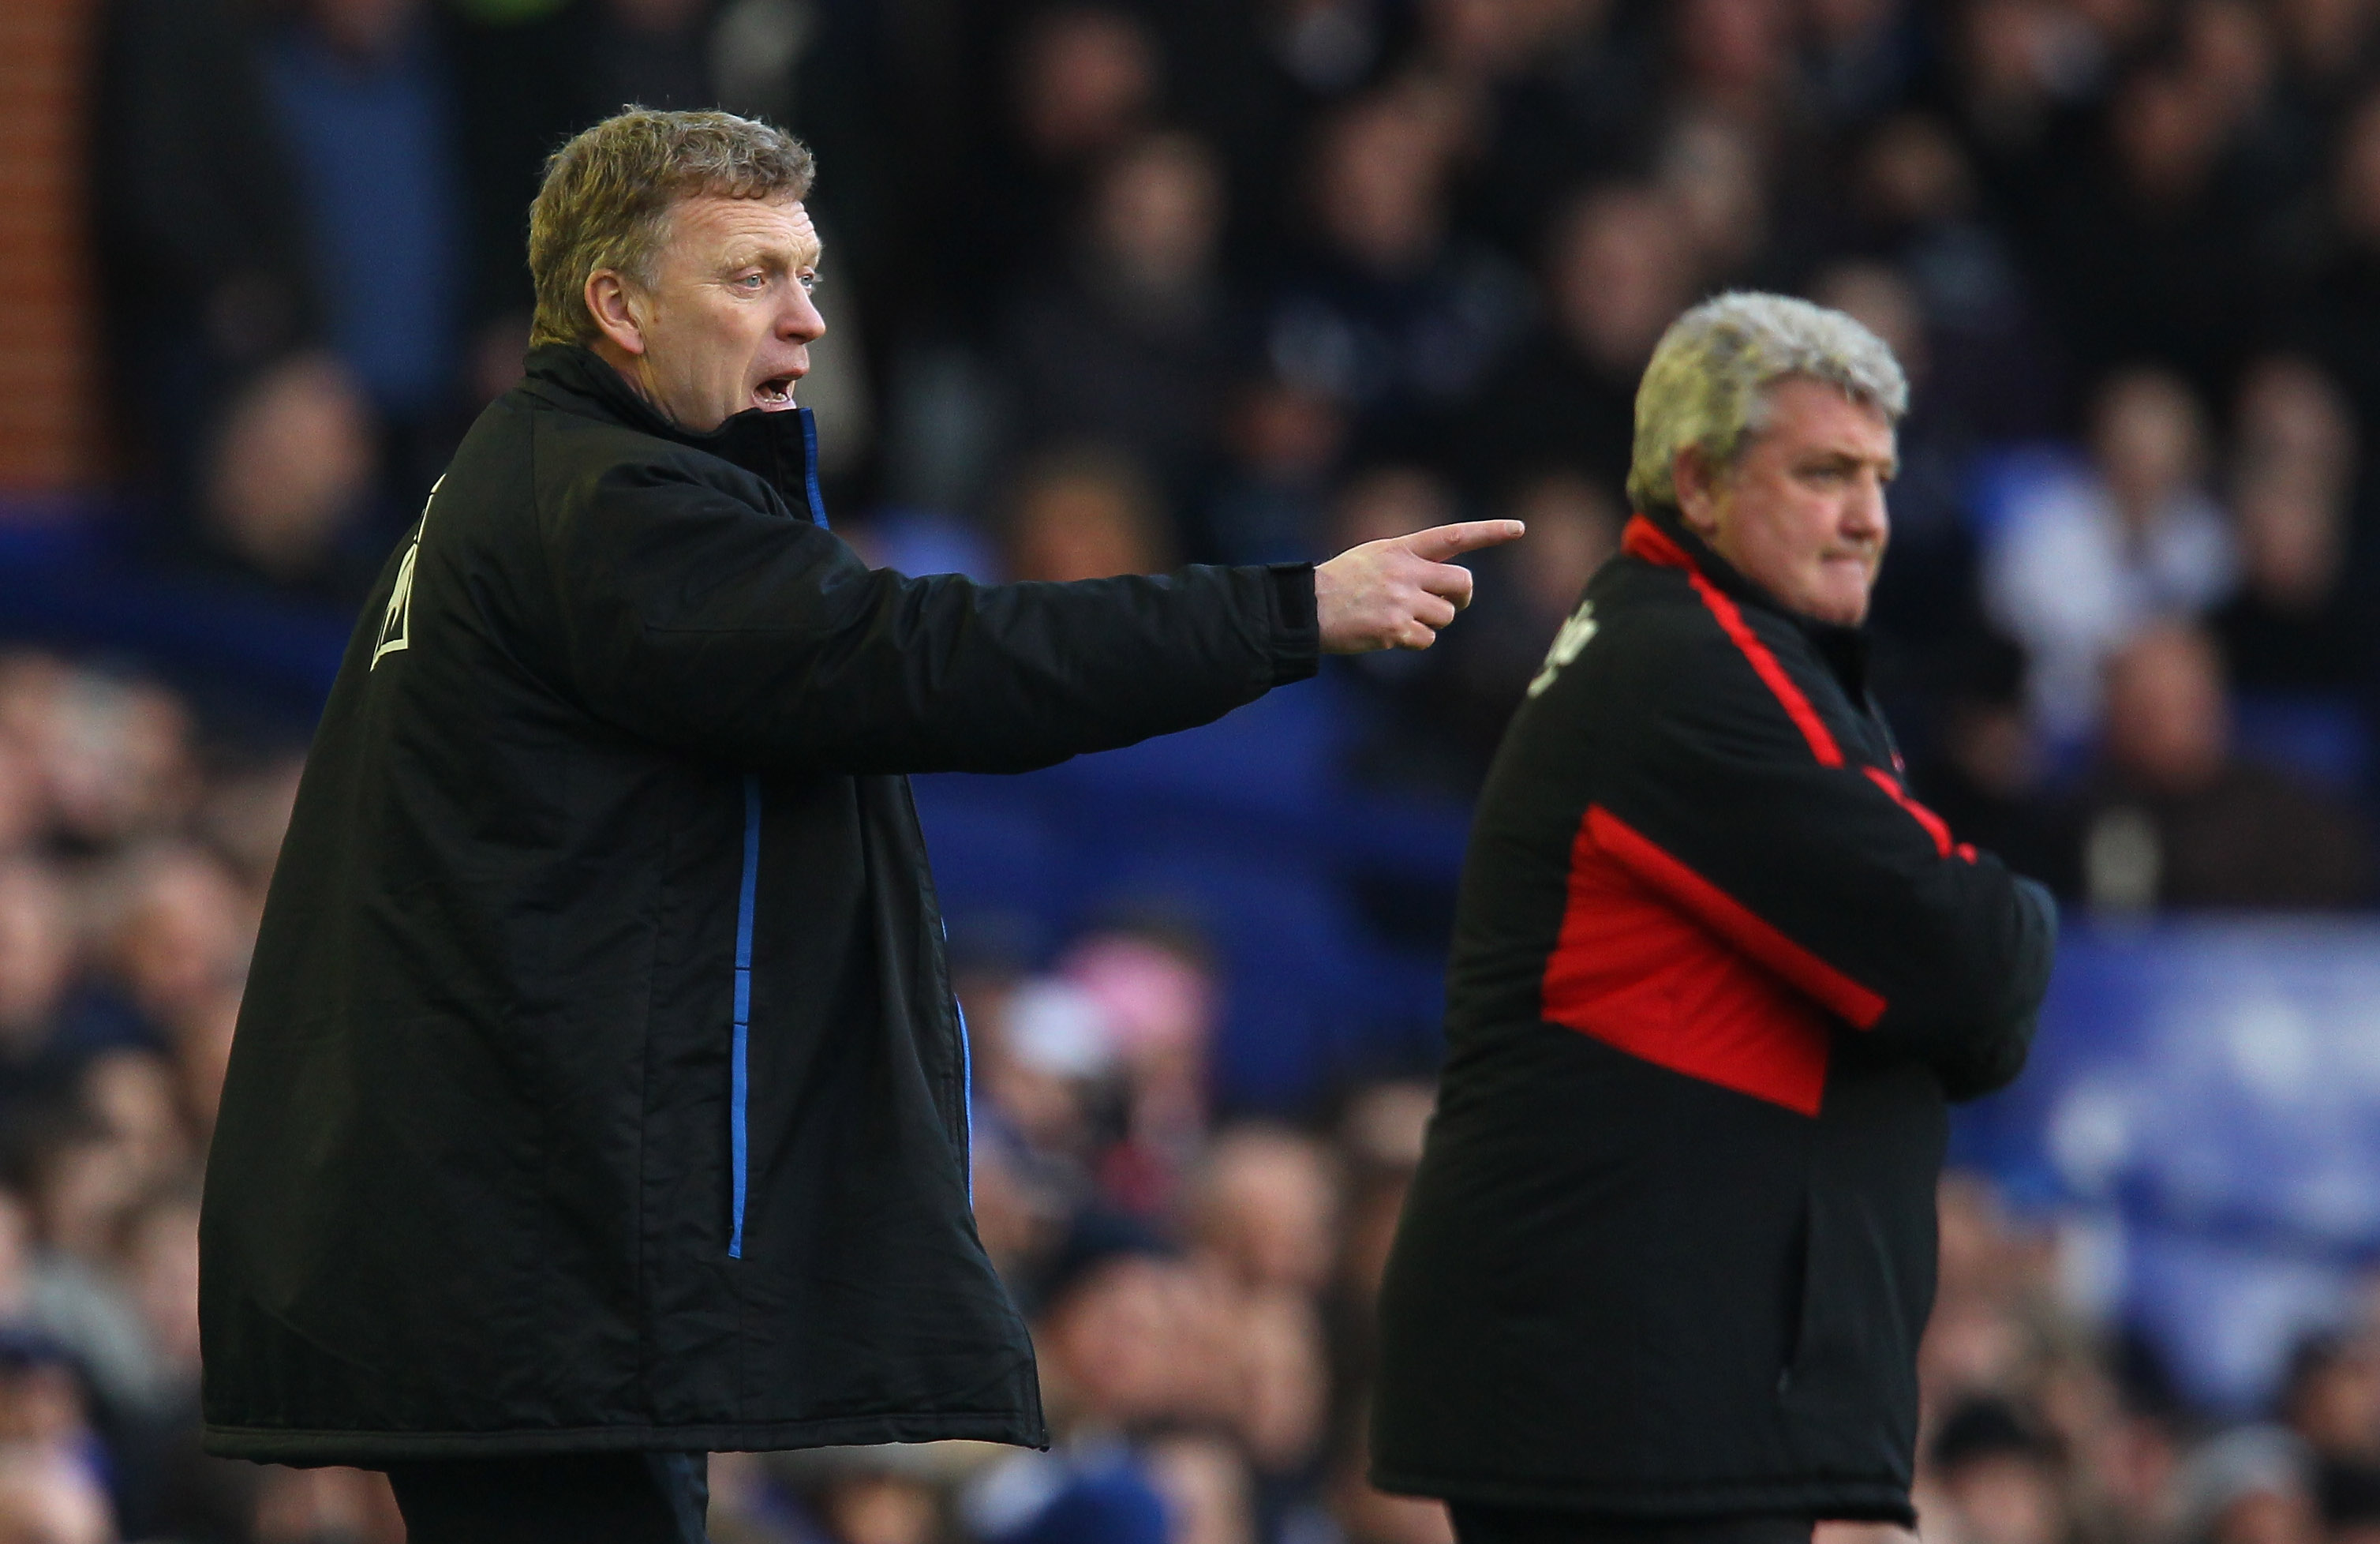 LIVERPOOL, ENGLAND - FEBRUARY 26:  David Moyes the manager of Everton gives instructions to his players as Steve Bruce the manager of Sunderland looks on during the Barclays Premier League match between Everton and Sunderland at Goodison Park on February